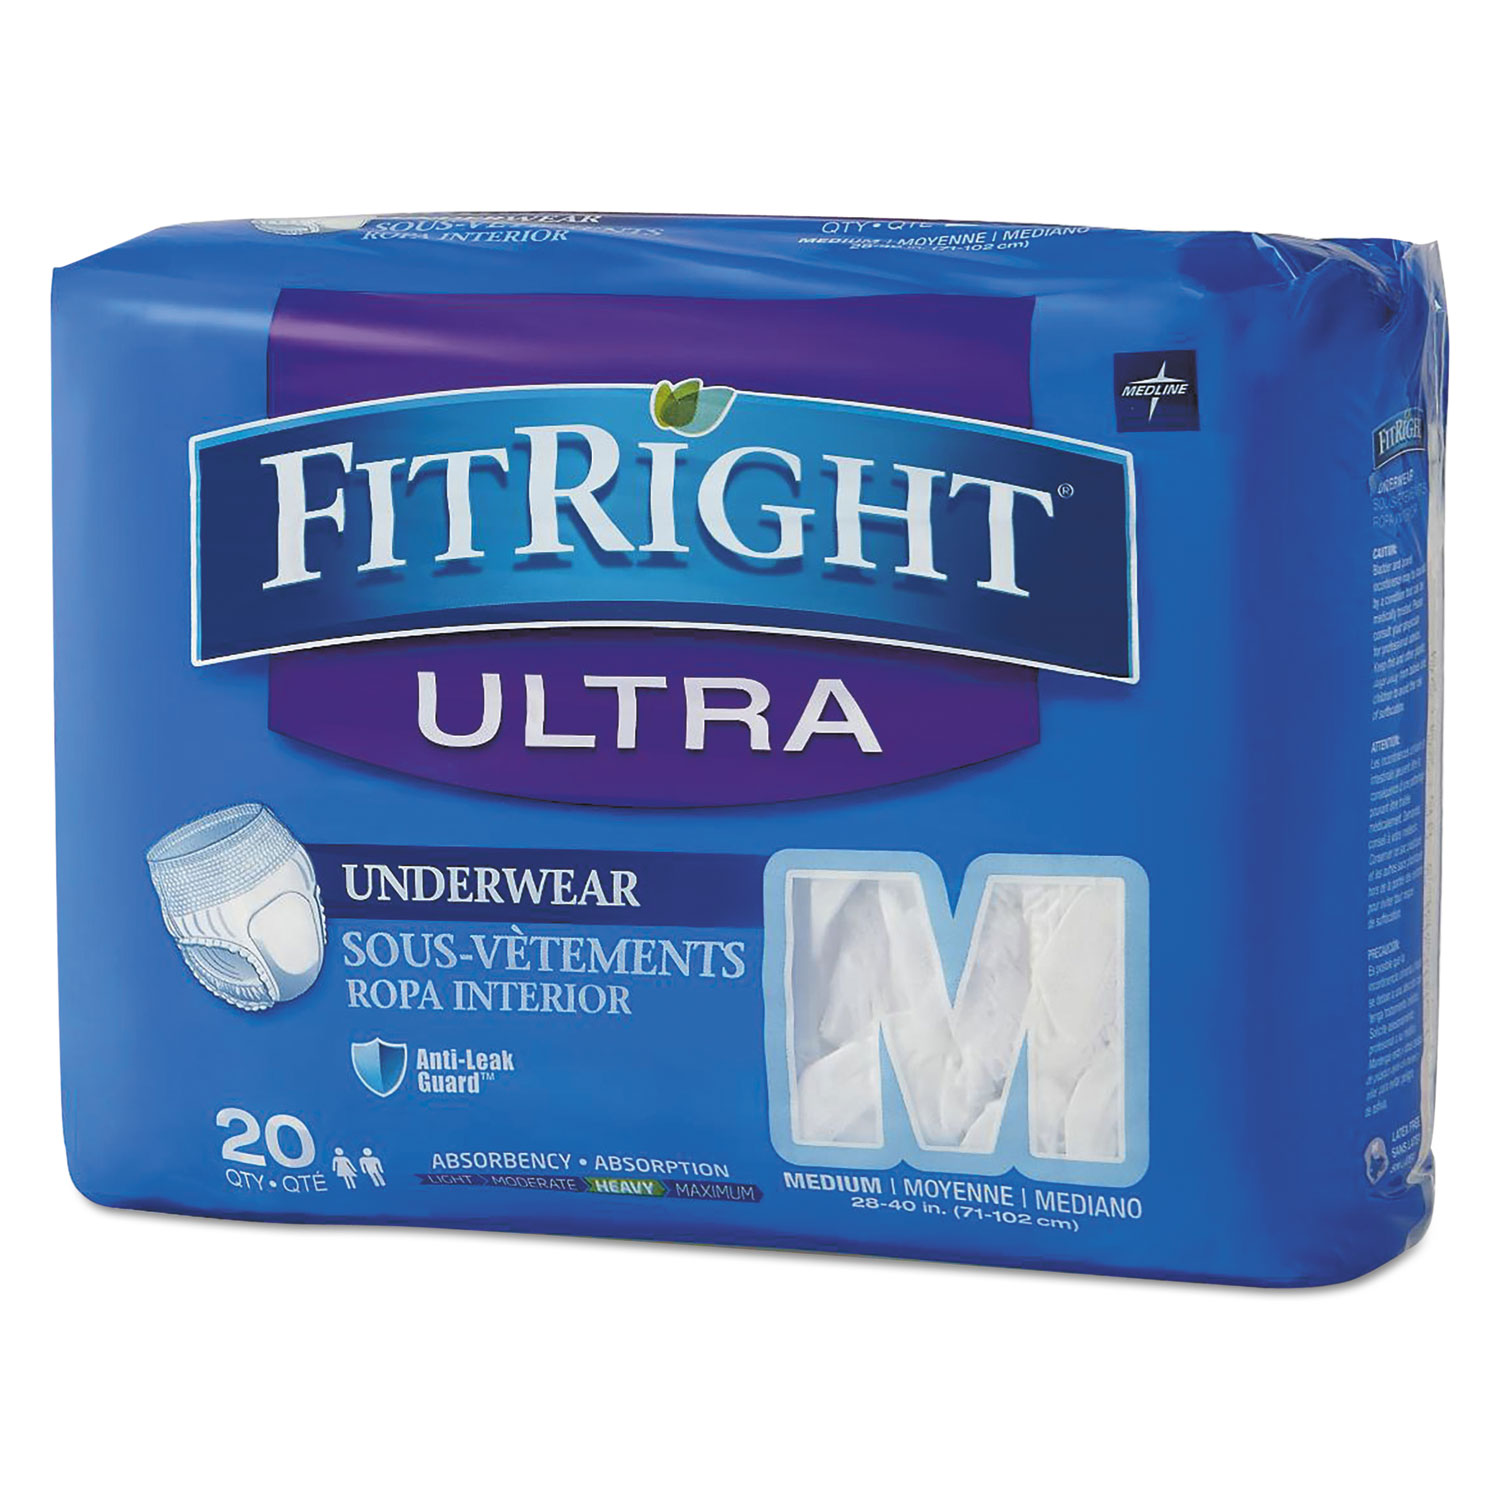  Medline FIT23005A FitRight Ultra Protective Underwear, Medium, 28 to 40 Waist, 20/Pack (MIIFIT23005A) 